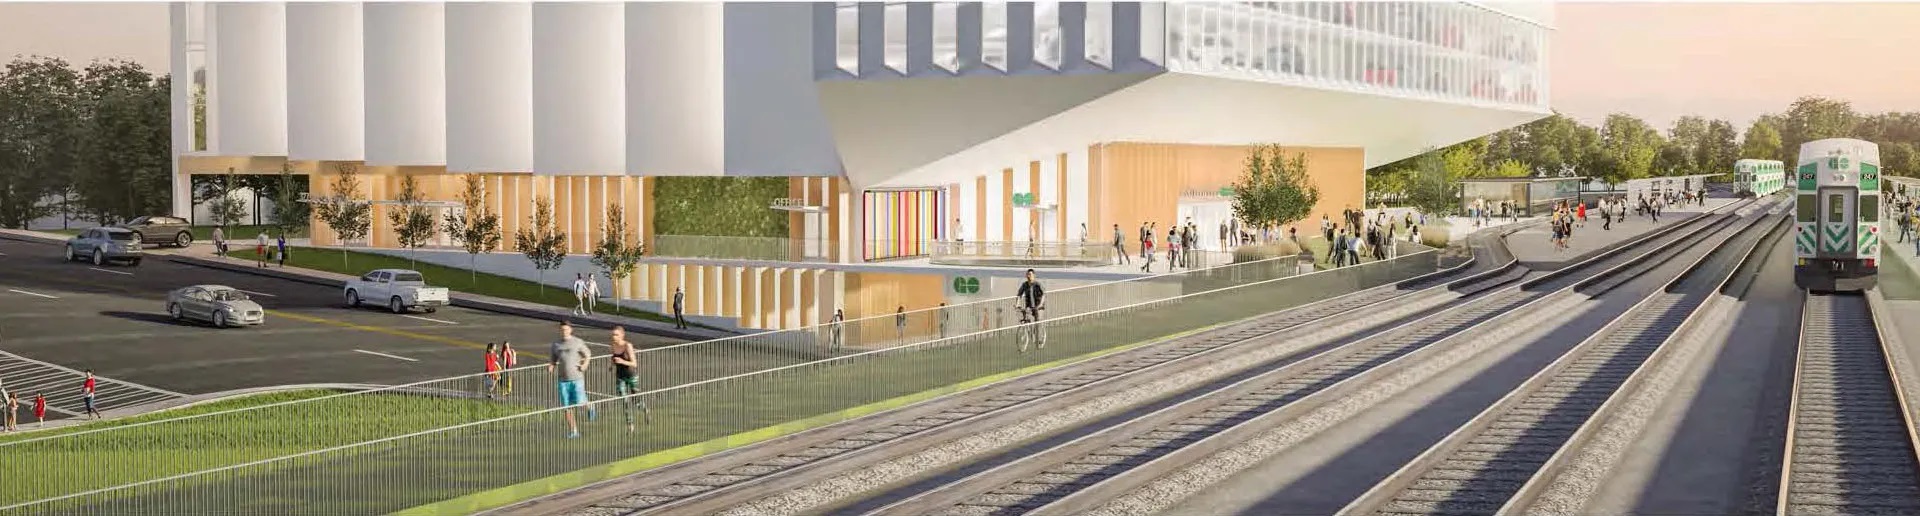 Metrolinx Open House on Long Branch, Mimico, and Park Lawn GO Stations –  SETAC – South Etobicoke Transit Action Committee